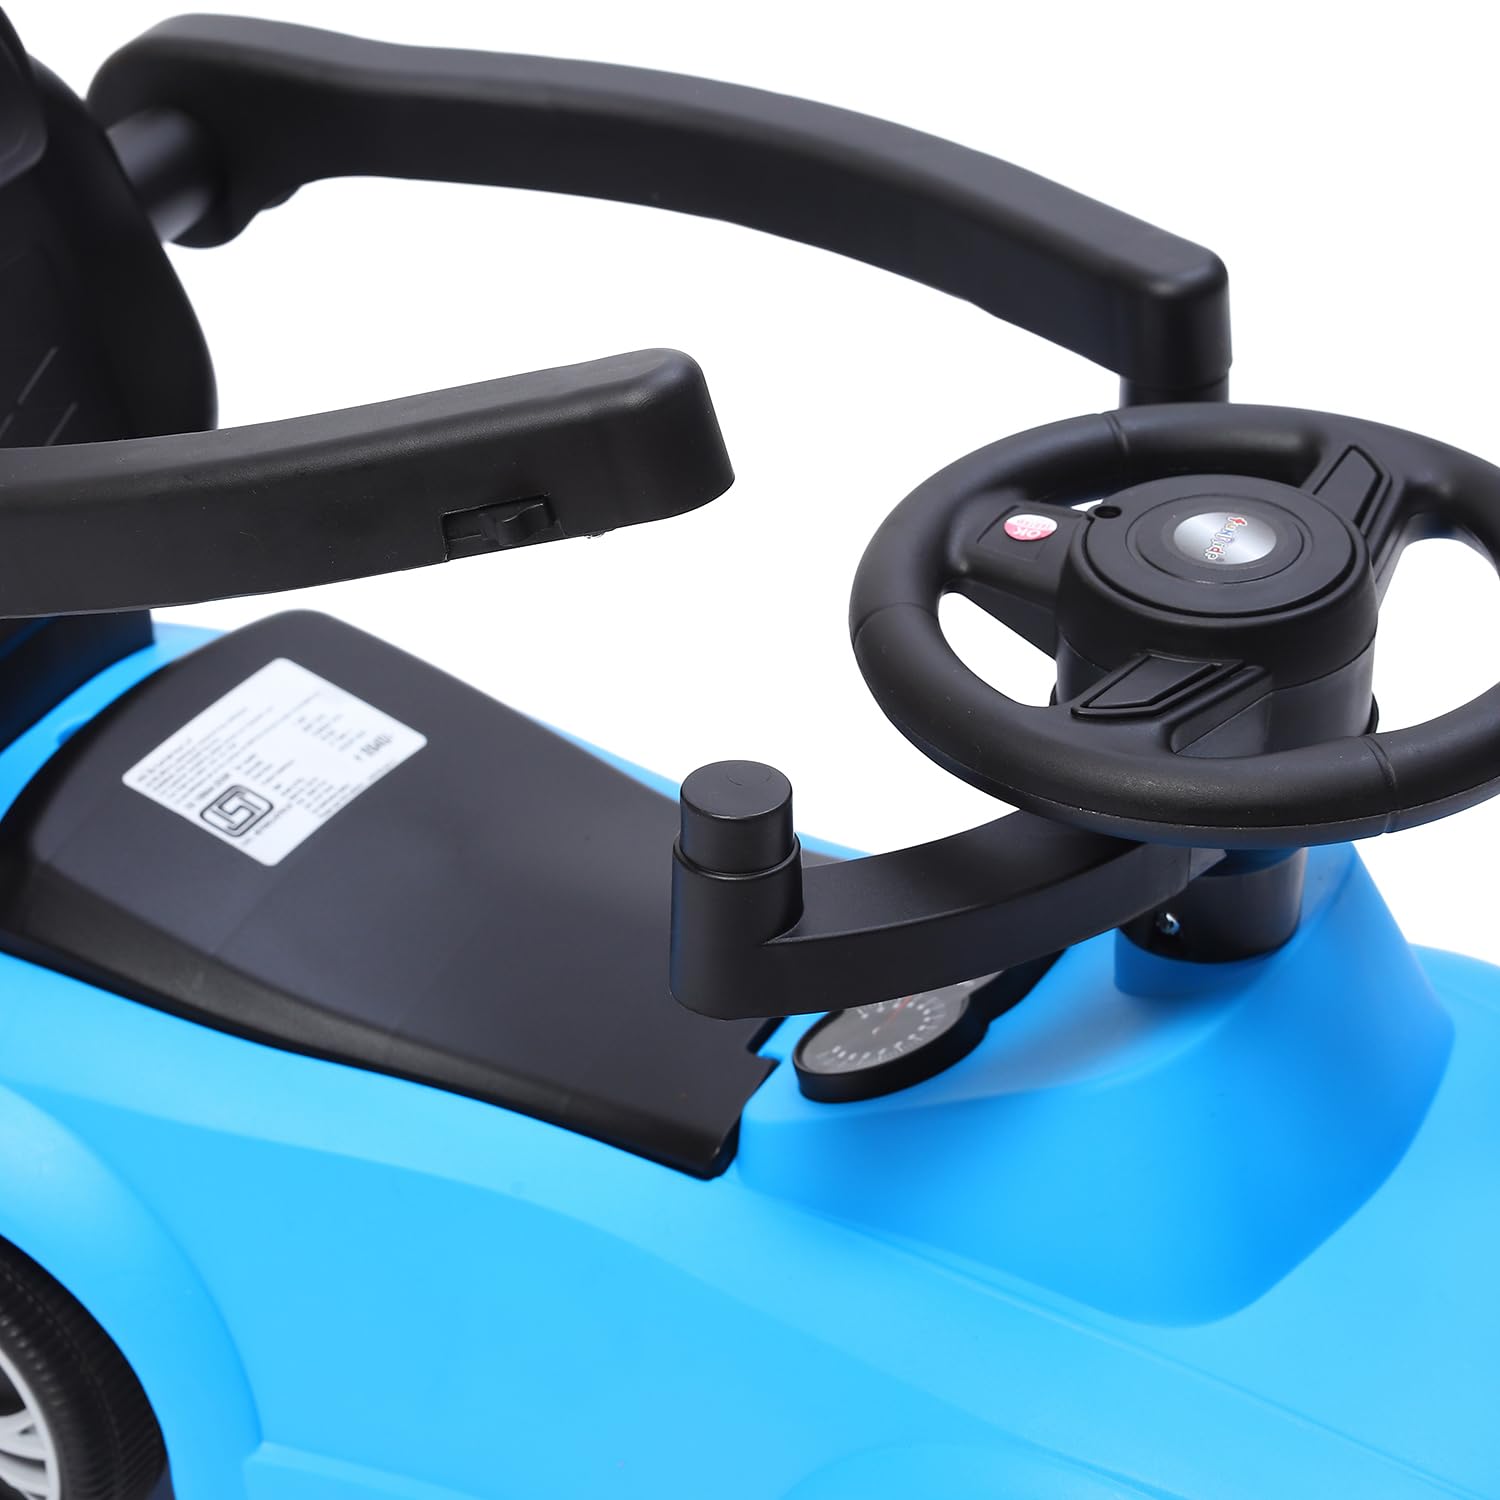 Car Ride On - R8 3-in-1 for Kids with Parent Handle, Music, Light, Backrest & Storage - 1 to 3 Years, Kids Indoor/Outdoor Toy Car for Boys and Girls